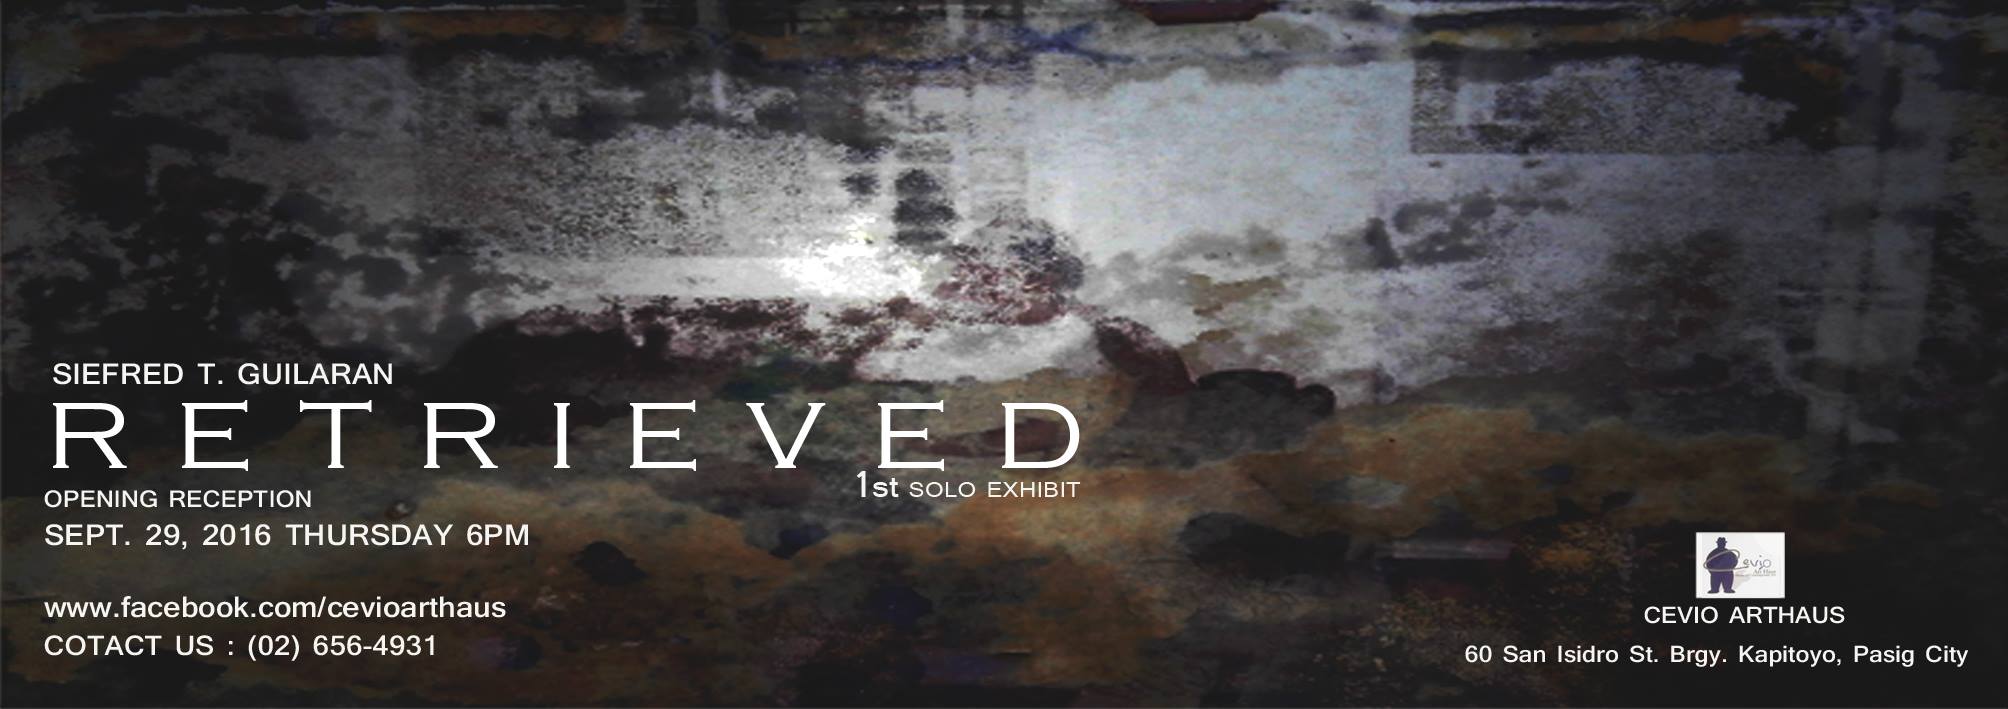 Retrieve: re-construction of memory Siefred Guilaran – First Solo Exhibition 	 September 29 – October 8 Sep 29 at 6 PM to Oct 8 at 12 PM pin 	 Show Map Cevio Art Haus 60 San Isidro St., Bgy. Kapitolyo, Pasig, Philippines Siefred Guilaran, to say the least, is very interested in the past and its inviting rediscovery through its clues, objects and any material residues it leaves behind. With this recurrent theme threading his creative pursuits, he weaves together narratives that are immediately familiar and matters of rich visceral connections to him. In his predilection with the past, Guilaran turns to photographs and their inherent ability to reveal stark and quiet memories as reliable graphic records of time and repository of private lives and collective histories. Through his picture based paintings, he tries to reconnect on the original feel and circumstances of these mementos and rekindle what demands to be remembered and to hew on their significant lessons. In his first solo show, Retrieved, he takes on the role of an unwitting archivist as he turns to old photographs as the object of reference and negotiation. In doing this, he collected and borrowed old photos, most of which still produced in film and now considered ephemera, from his neighbors and old friends from where he lives and who are deeply connected to a river which they all share fond and tragic memories as a community. Most of these of photos were tattered and partially damaged because of a flood that once devastated their place and this incident provides the context of sentimentality and premise of search and of his personal and parochial recollection. By mapping out memories through these old photographs, he is able to examine not just his neighborhood but hopes to rediscover himself as well. Indeed, memory is ever fleeting and just before they completely fade away, he steps to commit them to history by transmitting them to another medium altogether. From these snap shots, he comes out w